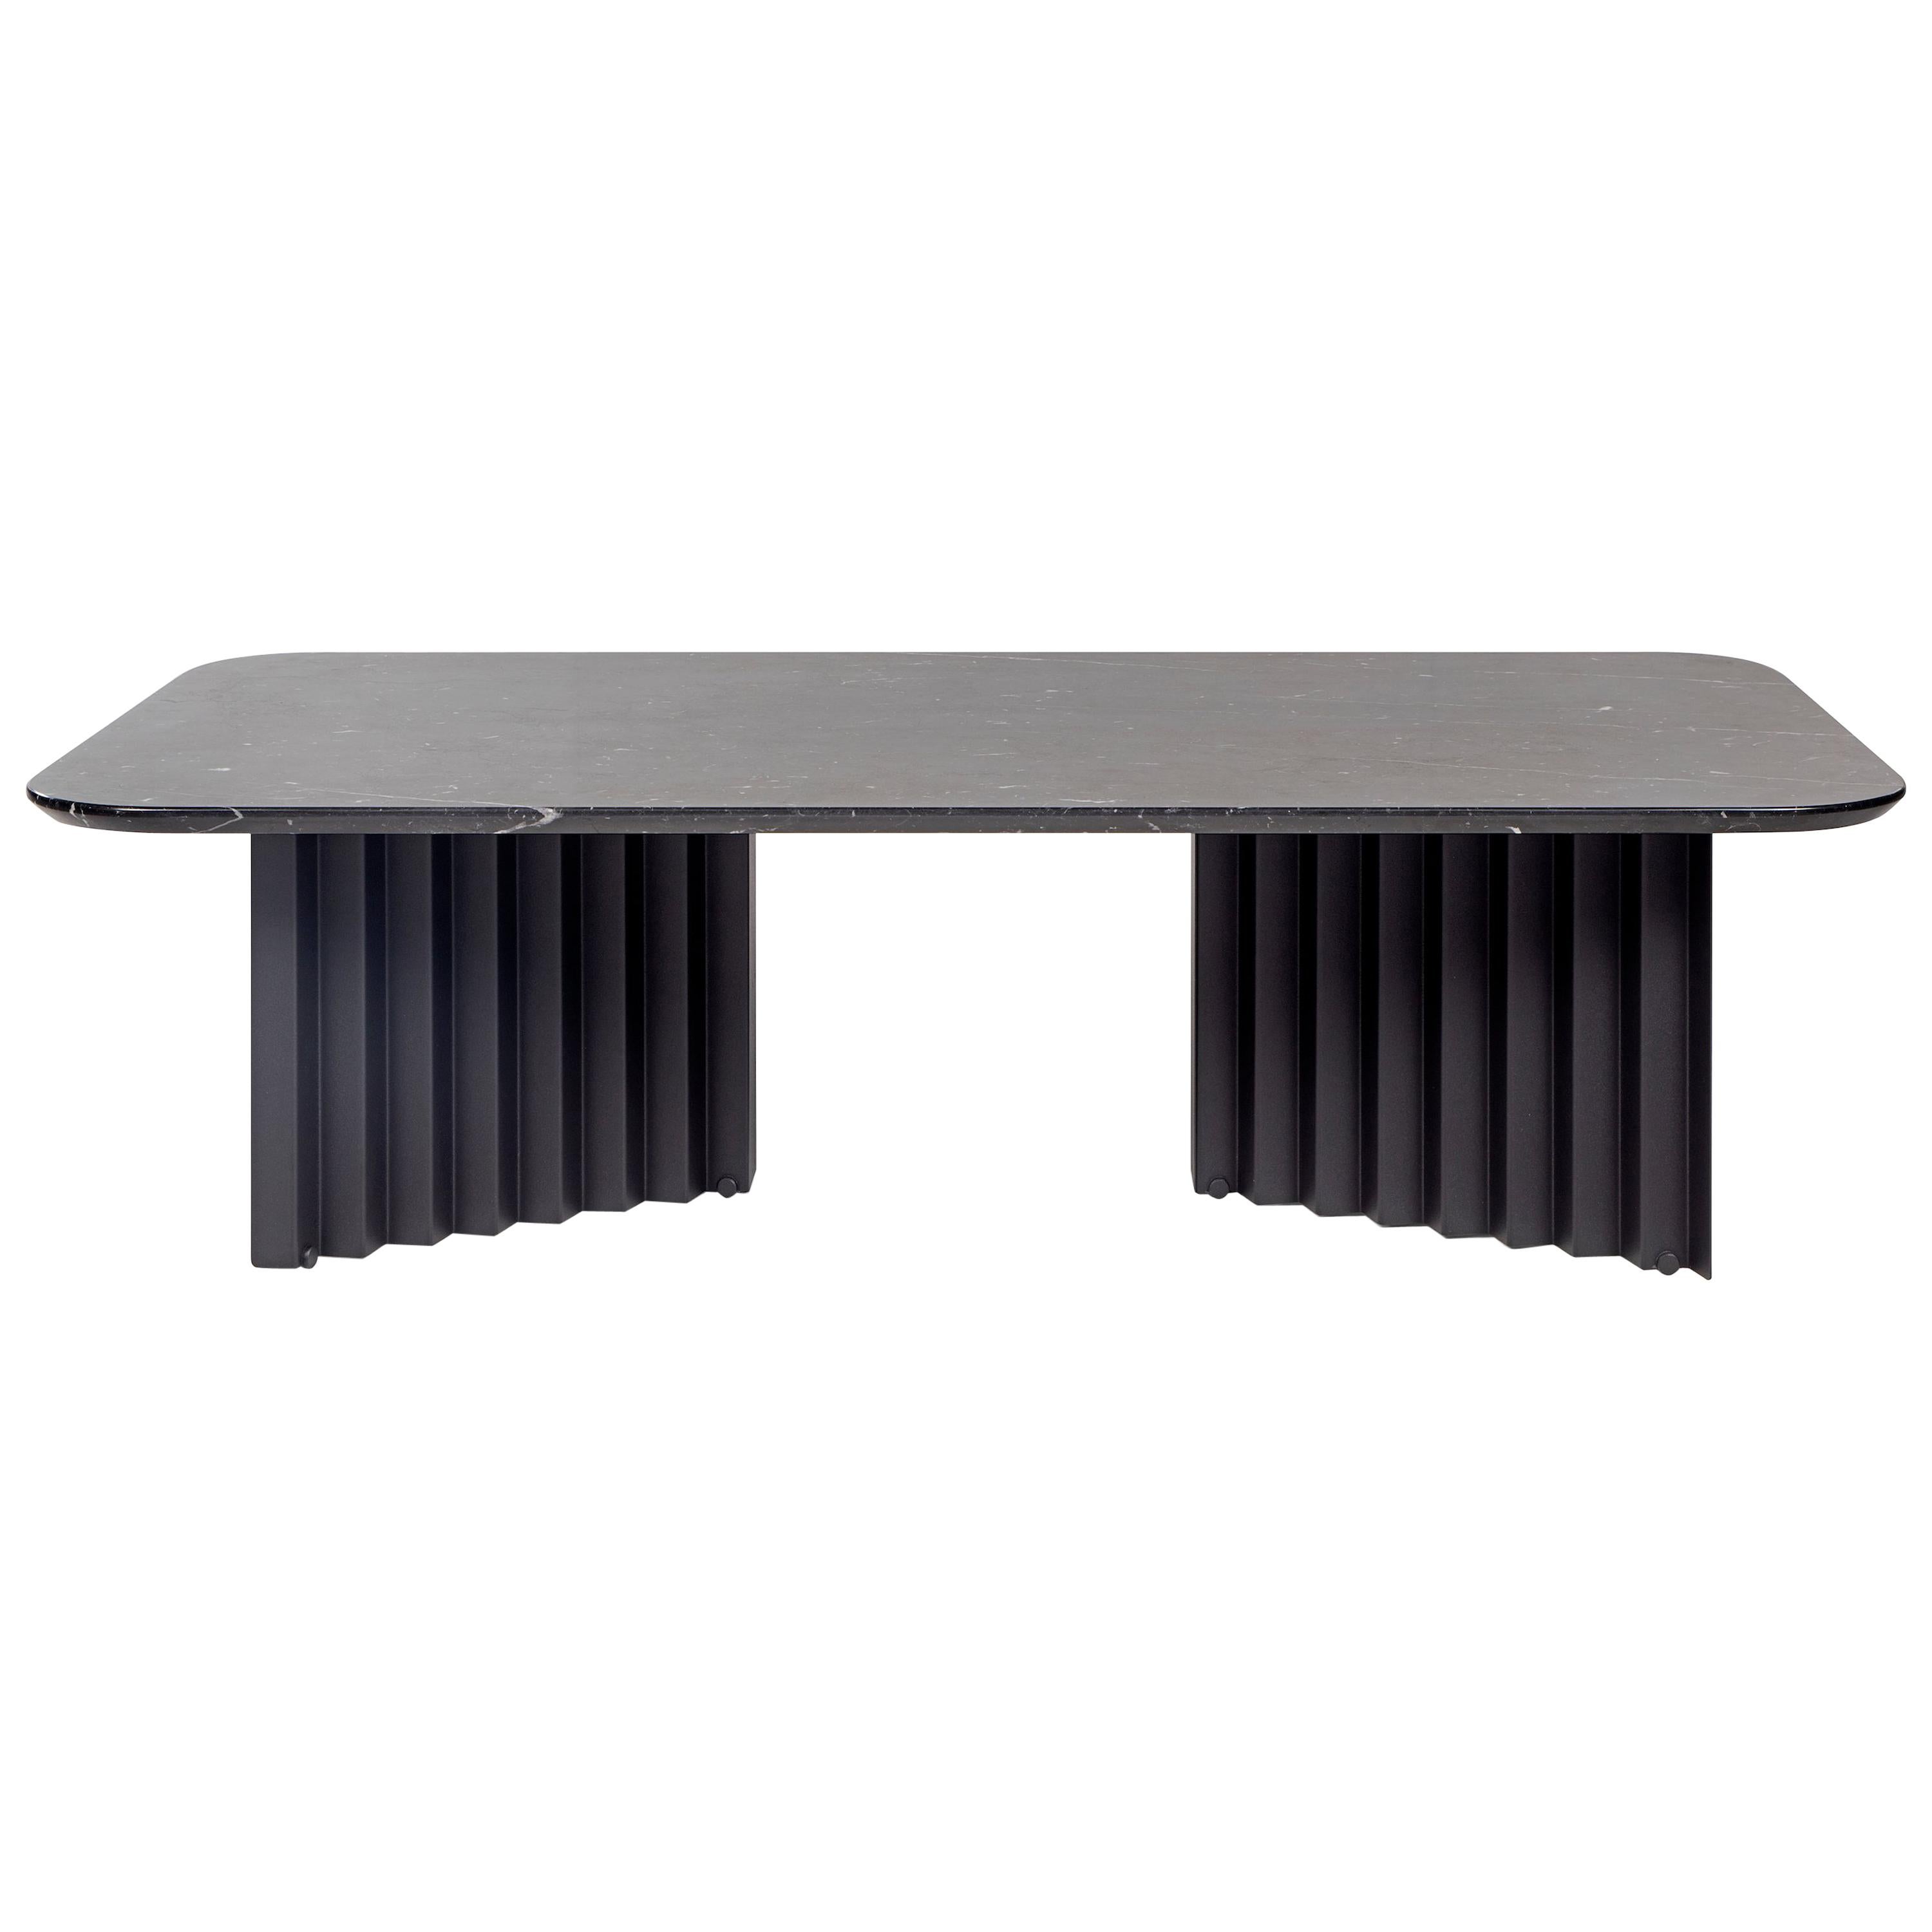 RS Barcelona Plec Large Table in Black Marble by A.P.O.